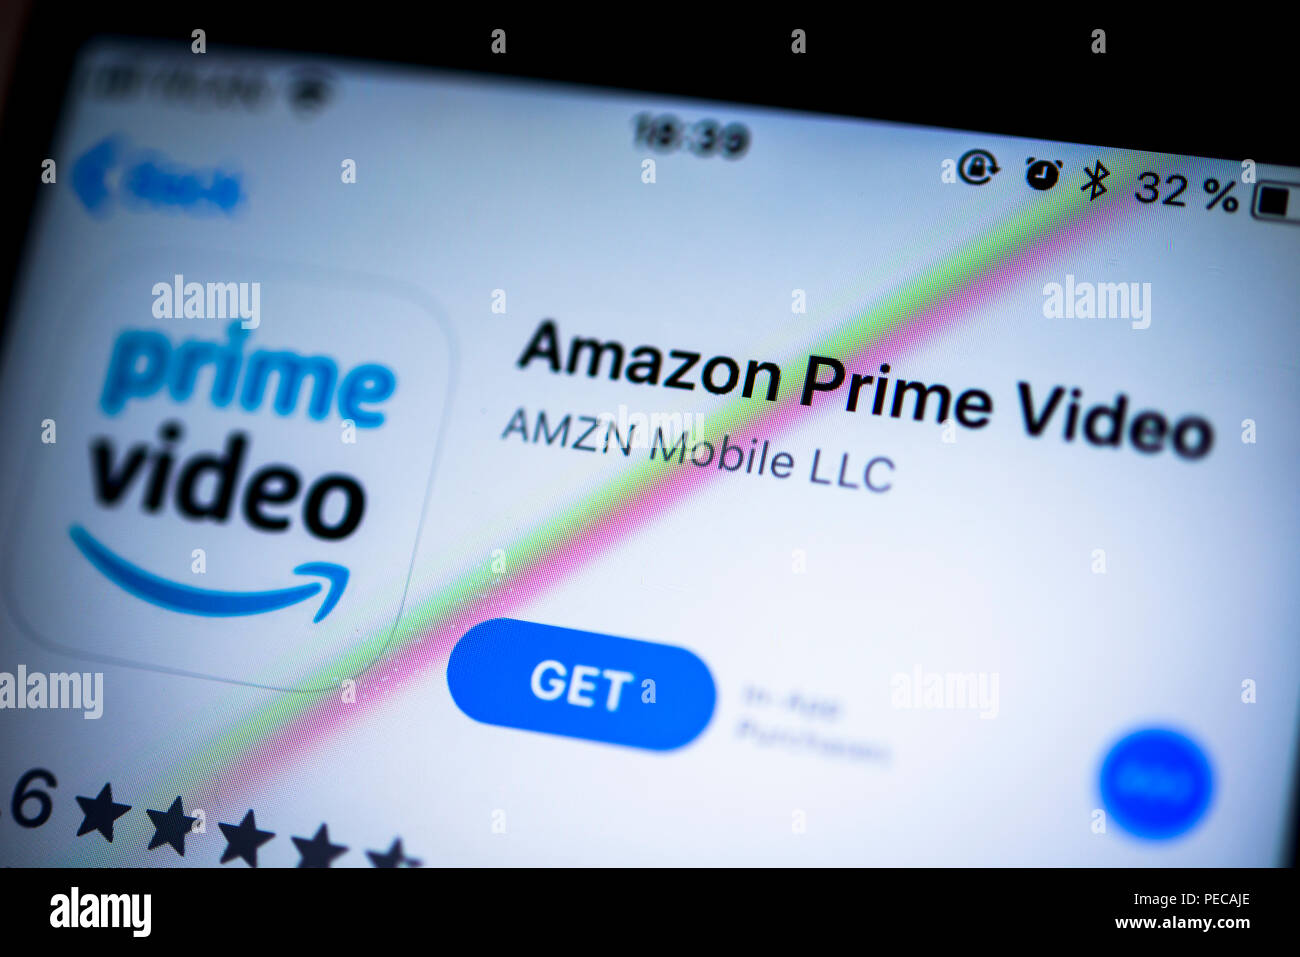 Amazon Prime Video App in the Apple App Store, video streaming service, app icon, iPhone, iOS, smartphone, display, close-up Stock Photo